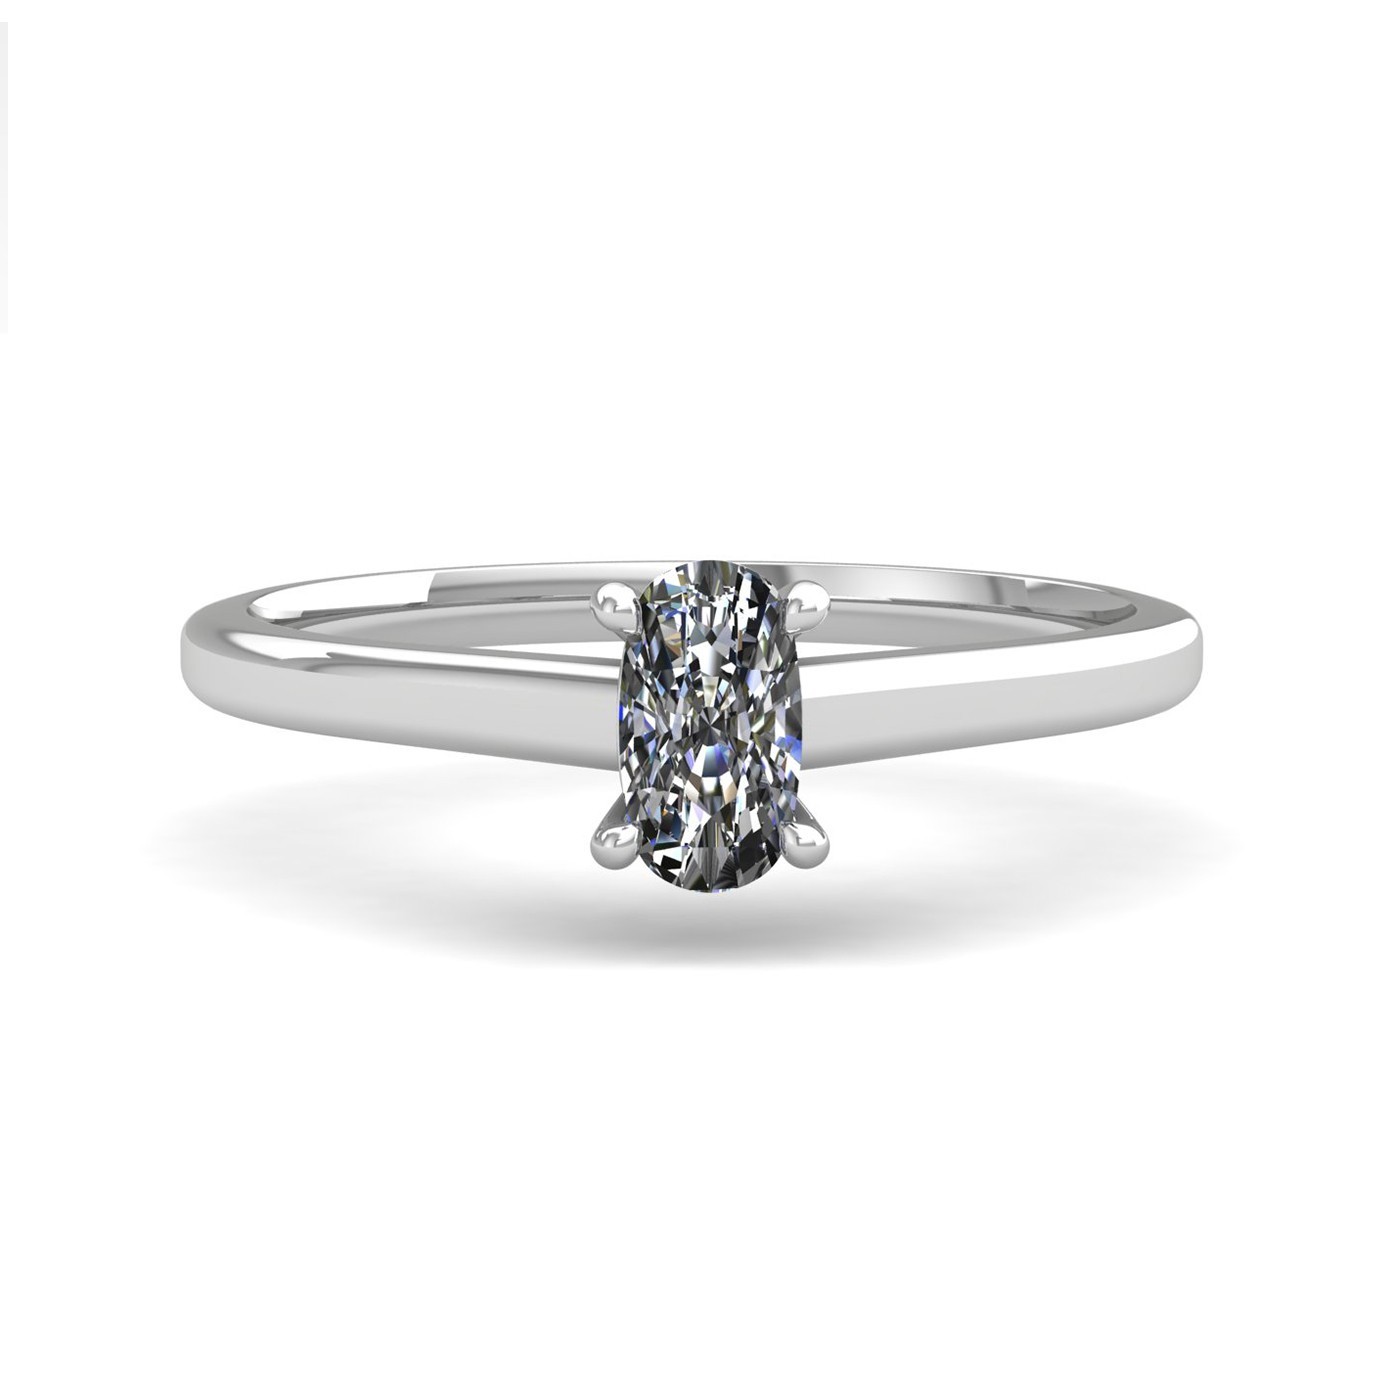 18k white gold  0,80 ct 4 prongs solitaire elongated cushion cut diamond engagement ring with whisper thin band Photos & images